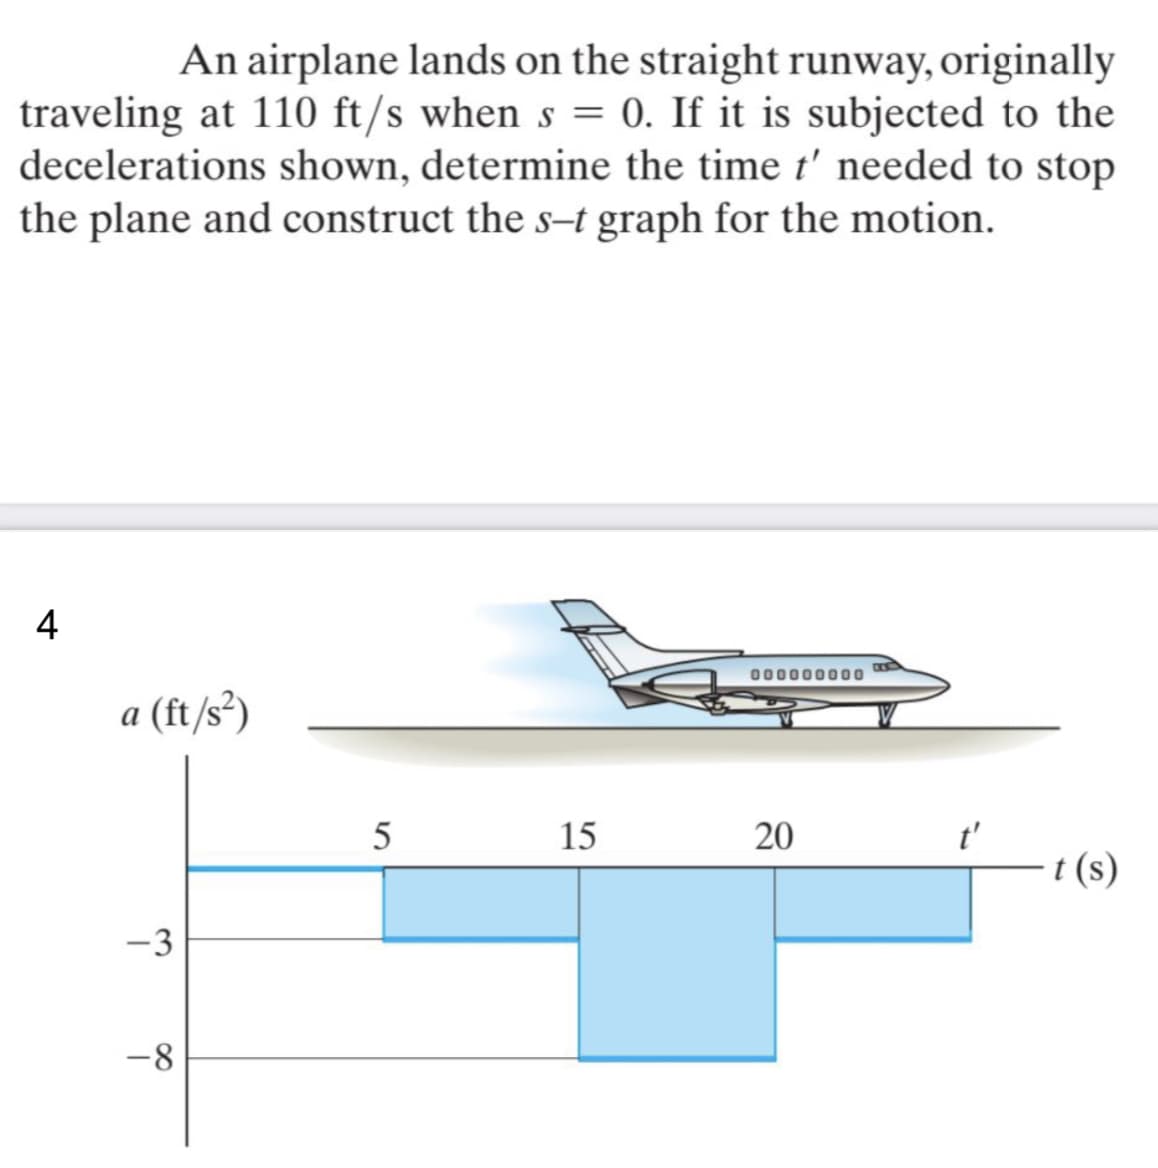 An airplane lands on the straight runway, originally
traveling at 110 ft/s when s = 0. If it is subjected to the
decelerations shown, determine the time t' needed to stop
the plane and construct the s-t graph for the motion.
4
000000000
a (ft/s²)
5
15
t (s)
-3
-8
20
